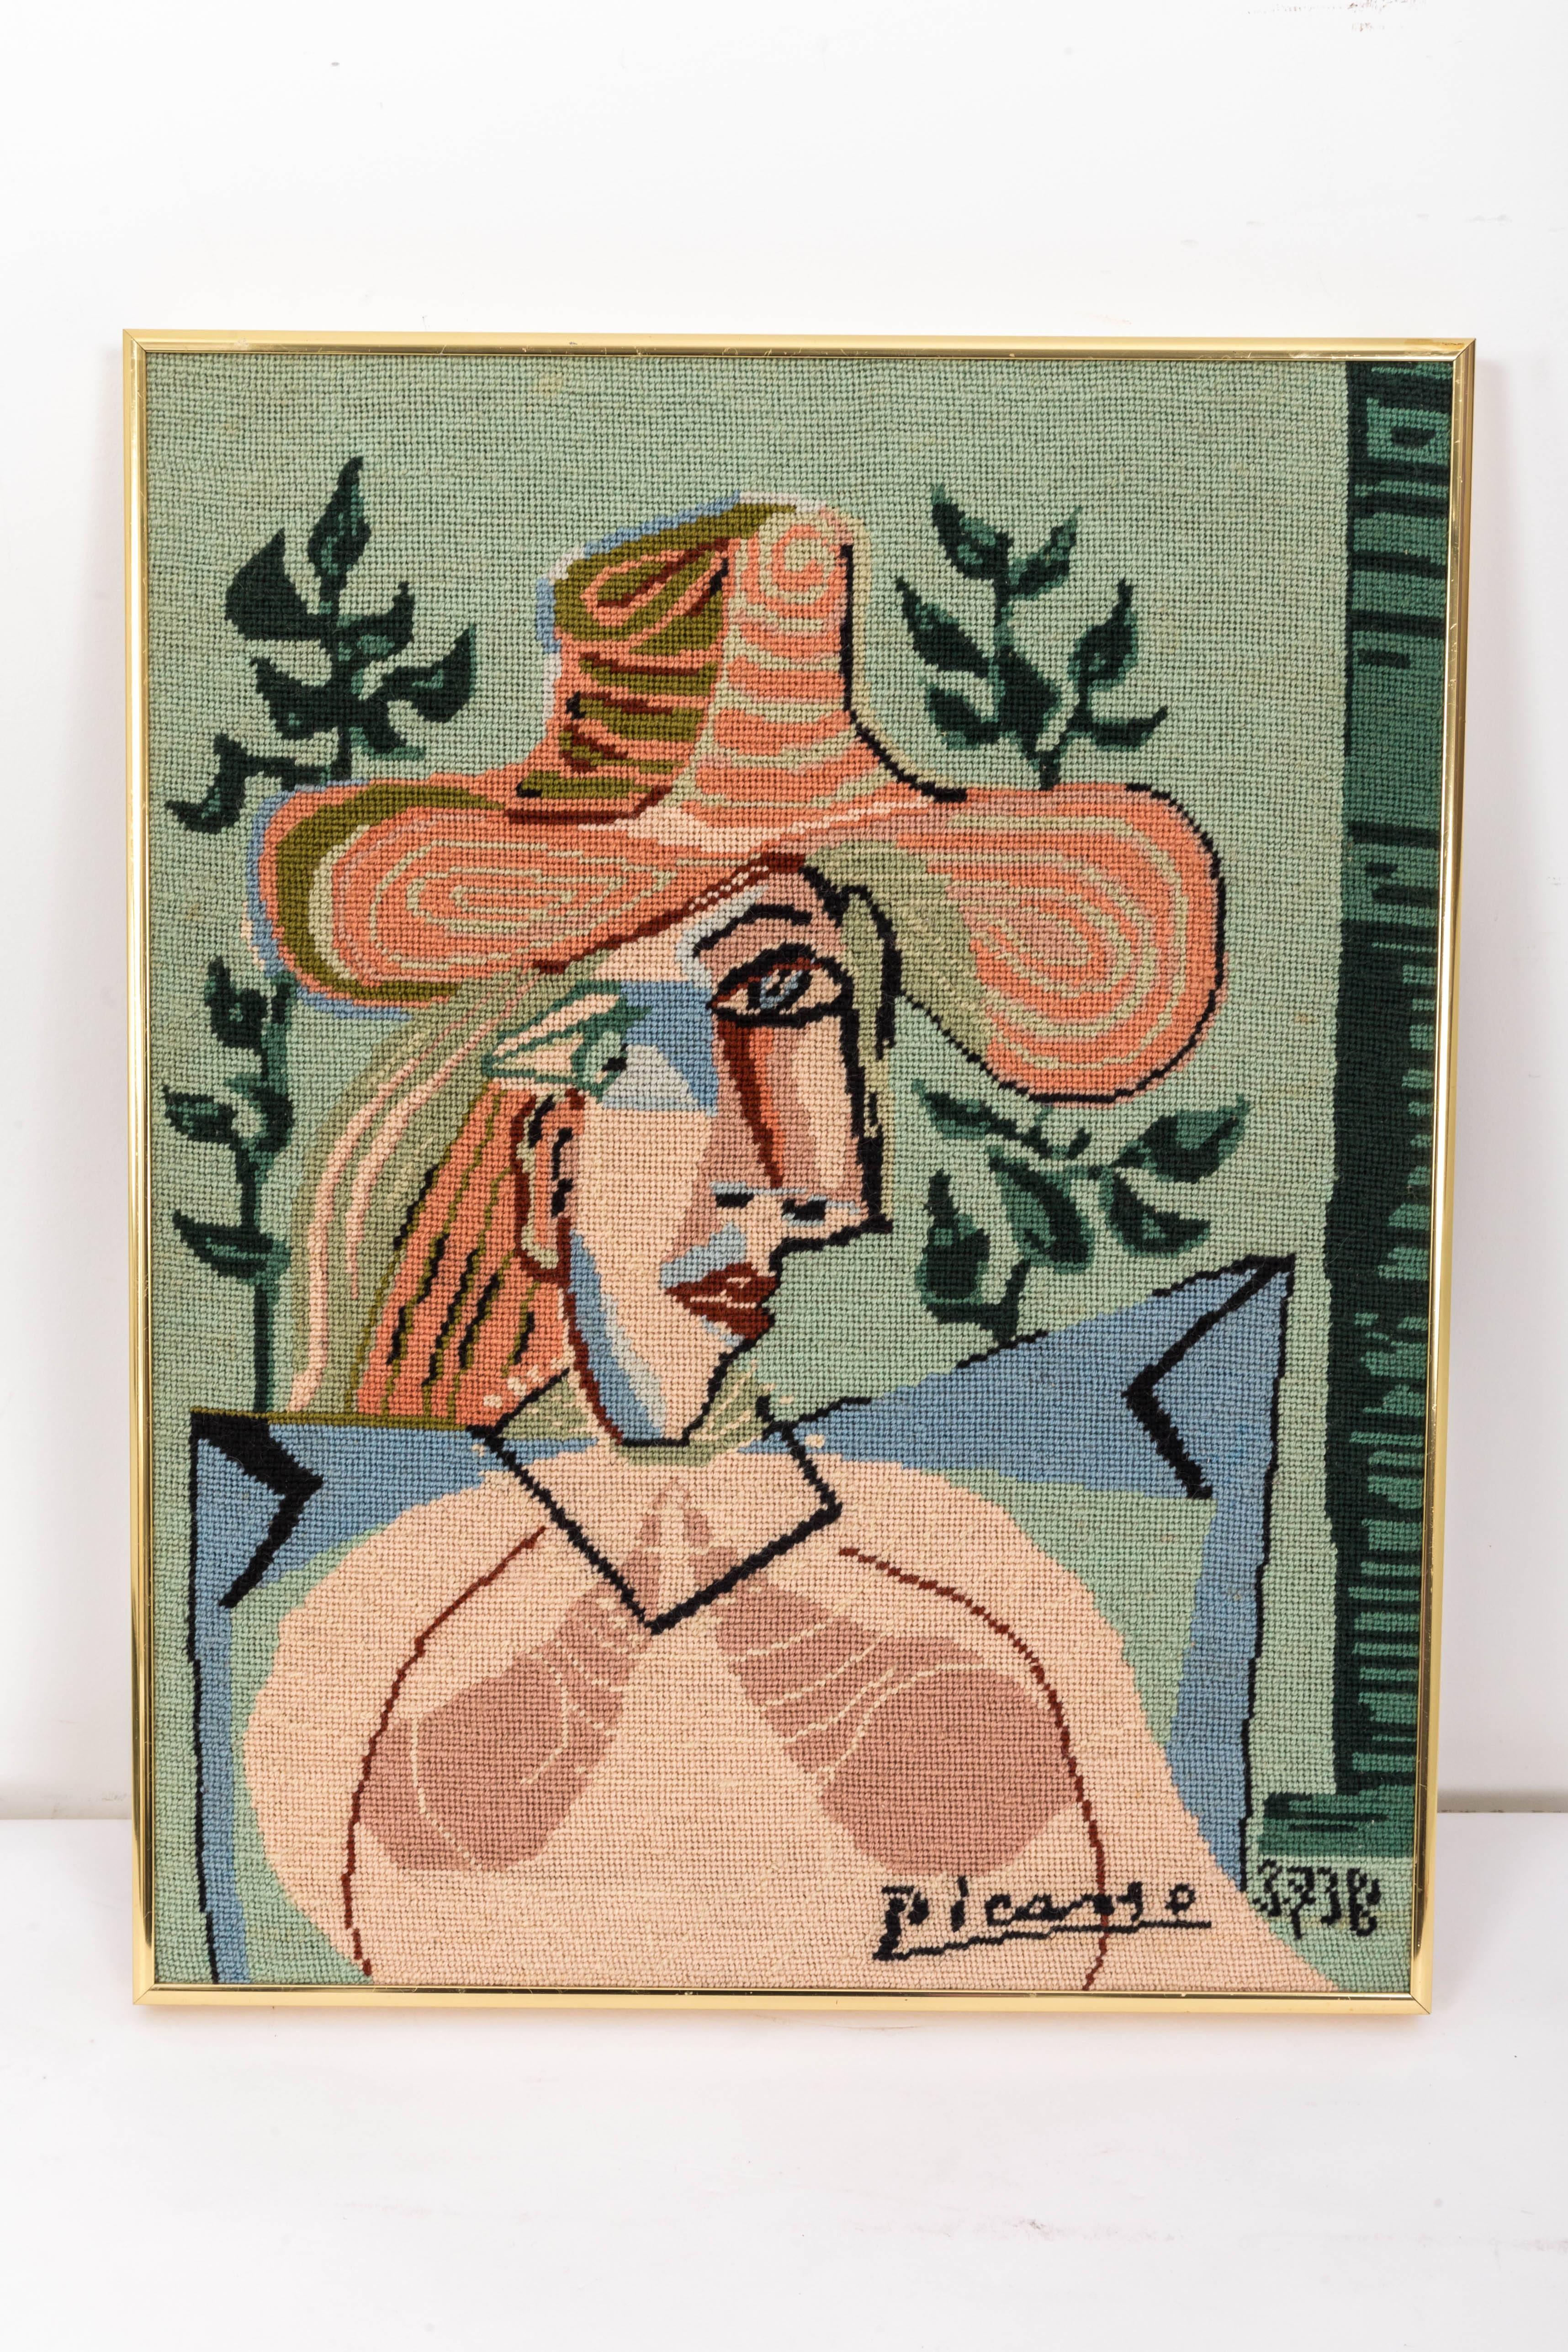 American Picasso Portrait in Needlepoint, Lady in Hat